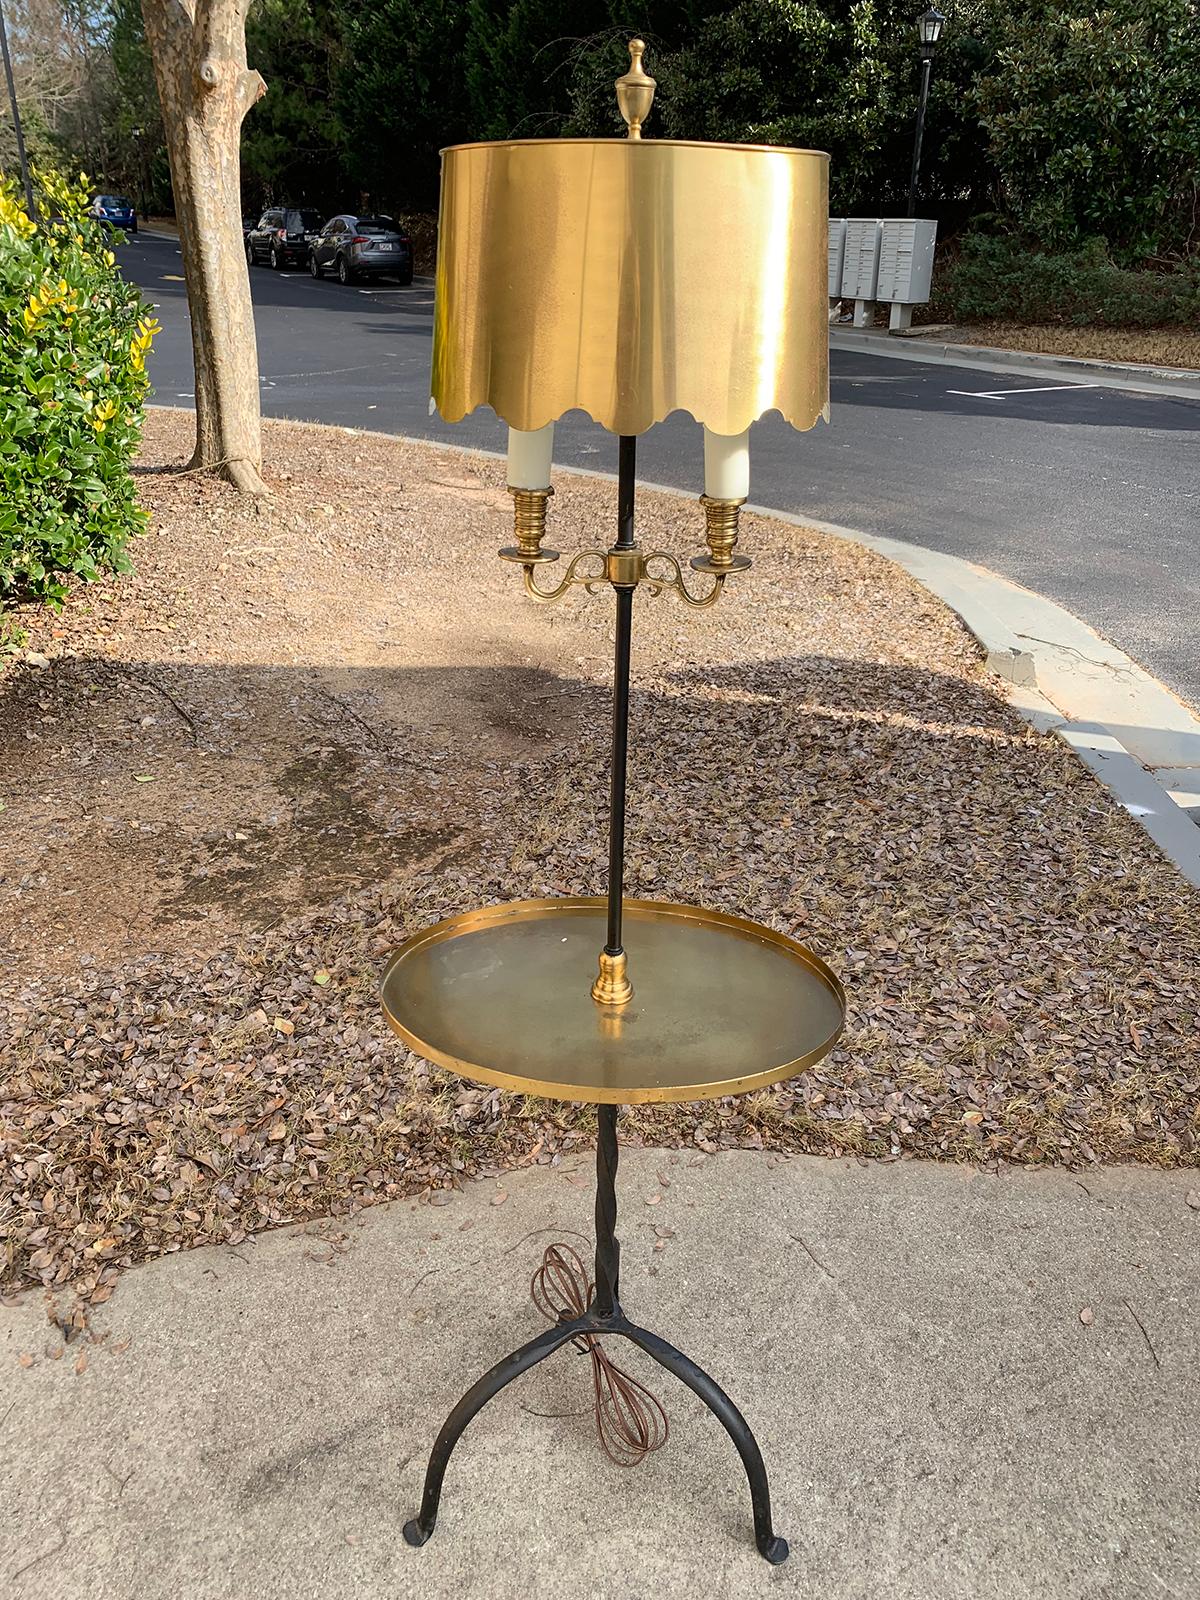 20th century iron floor lamp with brass table, adjustable brass shade.
Brand new wiring
Measures: 17